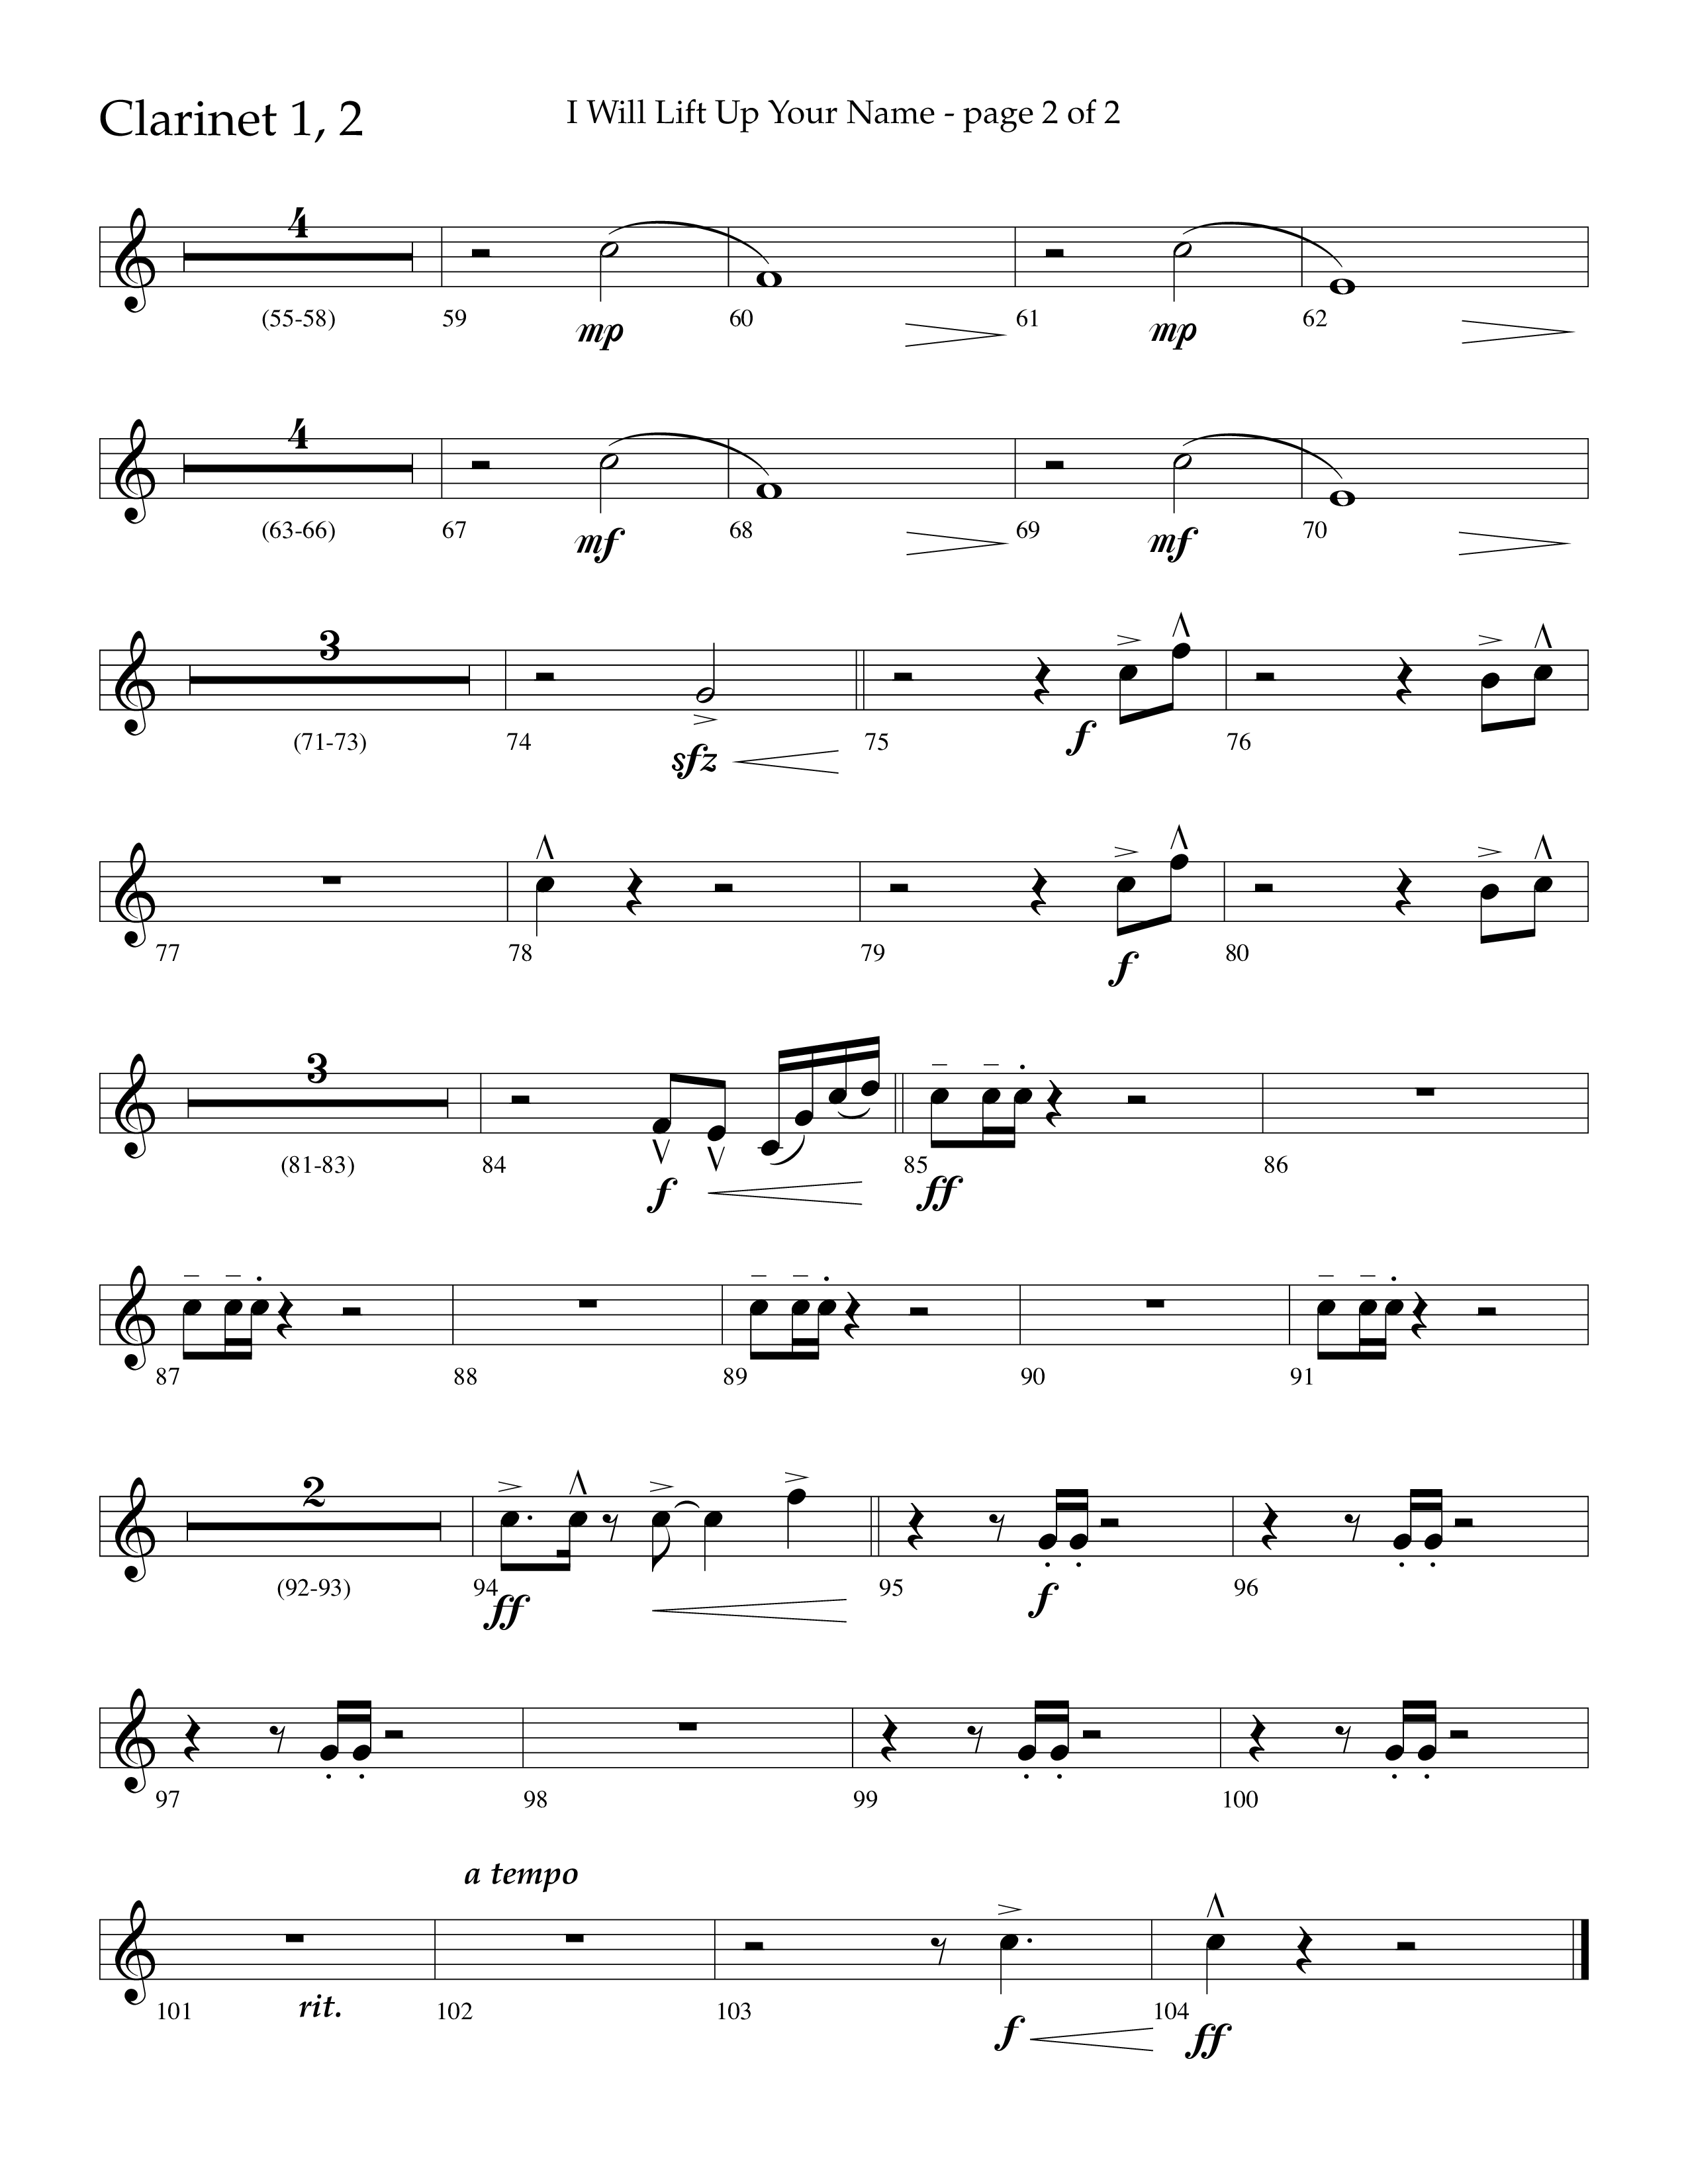 I Will Lift Up Your Name (Choral Anthem SATB) Clarinet 1/2 (Lifeway Choral / Arr. John Bolin / Orch. Cliff Duren)